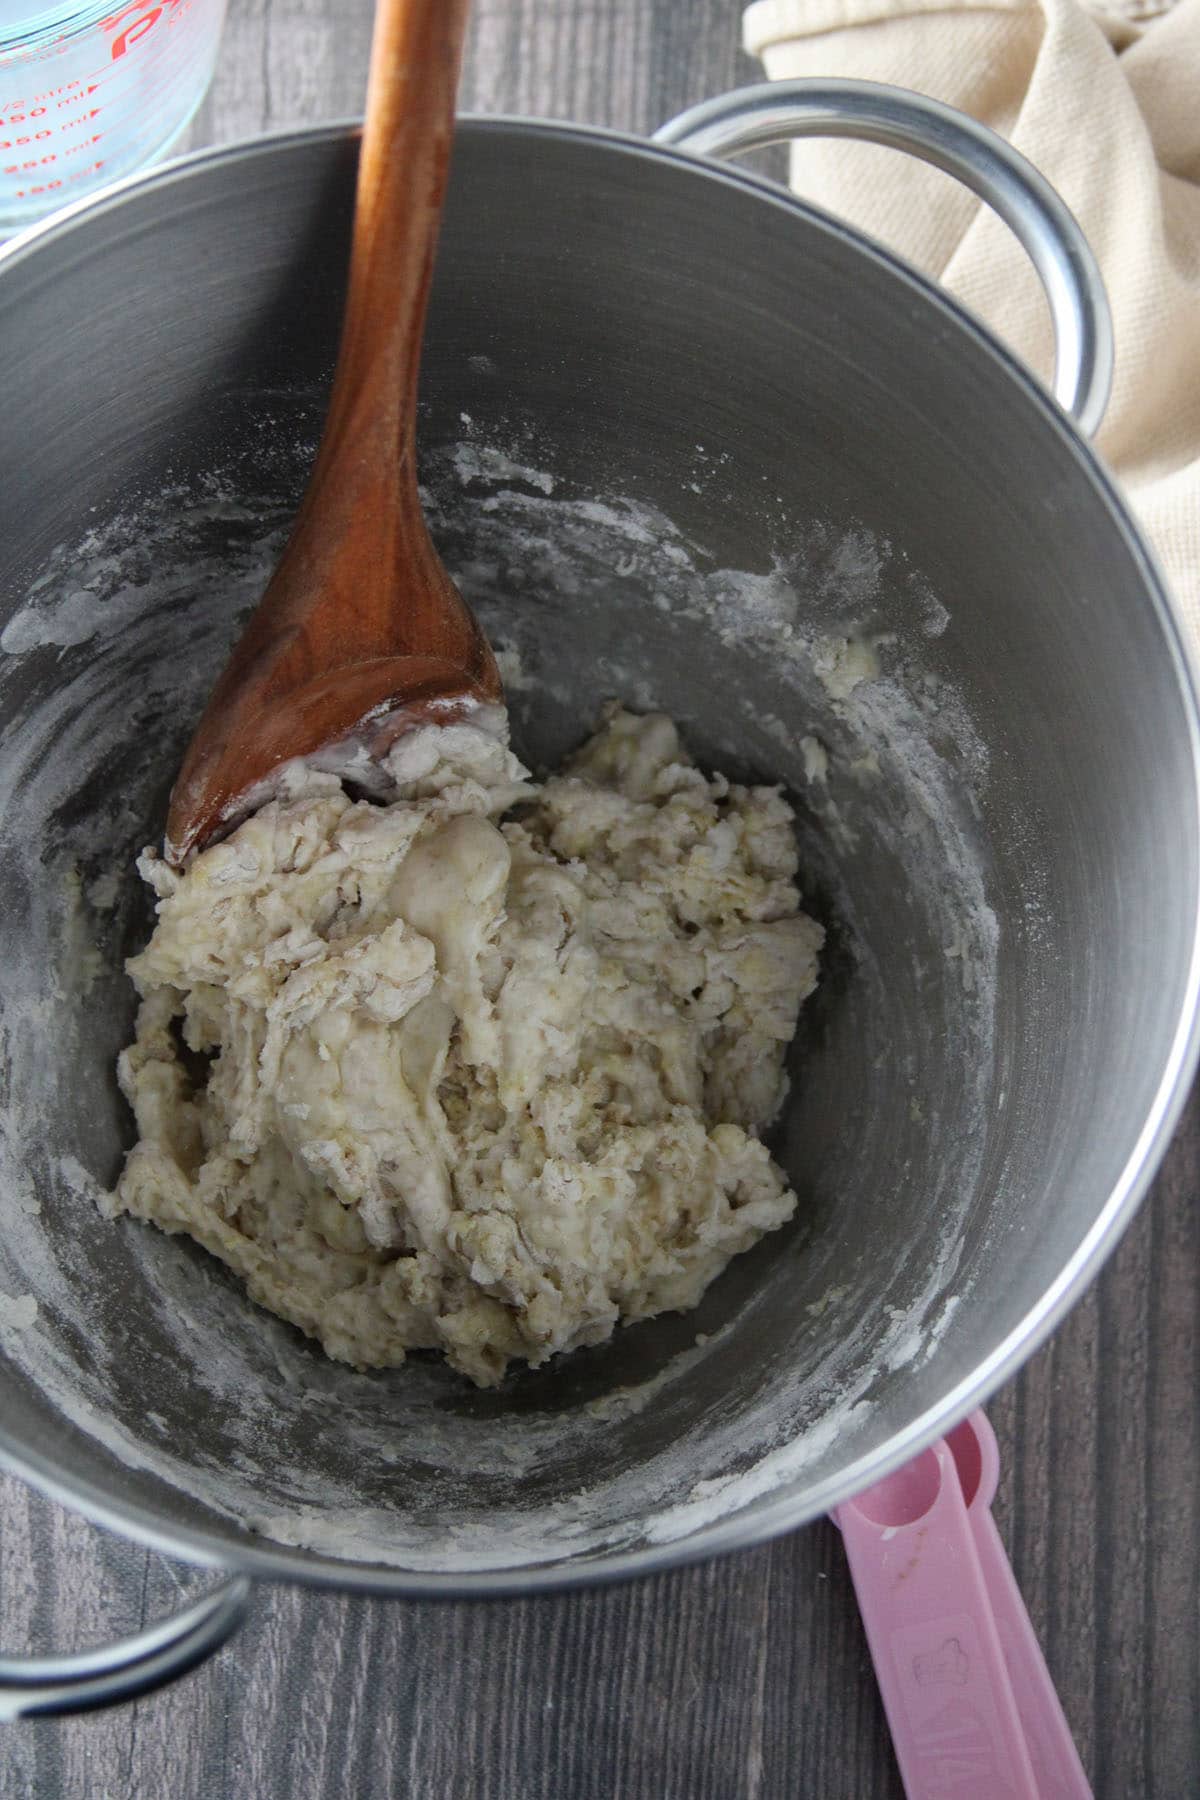 Mixing the sponge ingredients for the ensaymada.